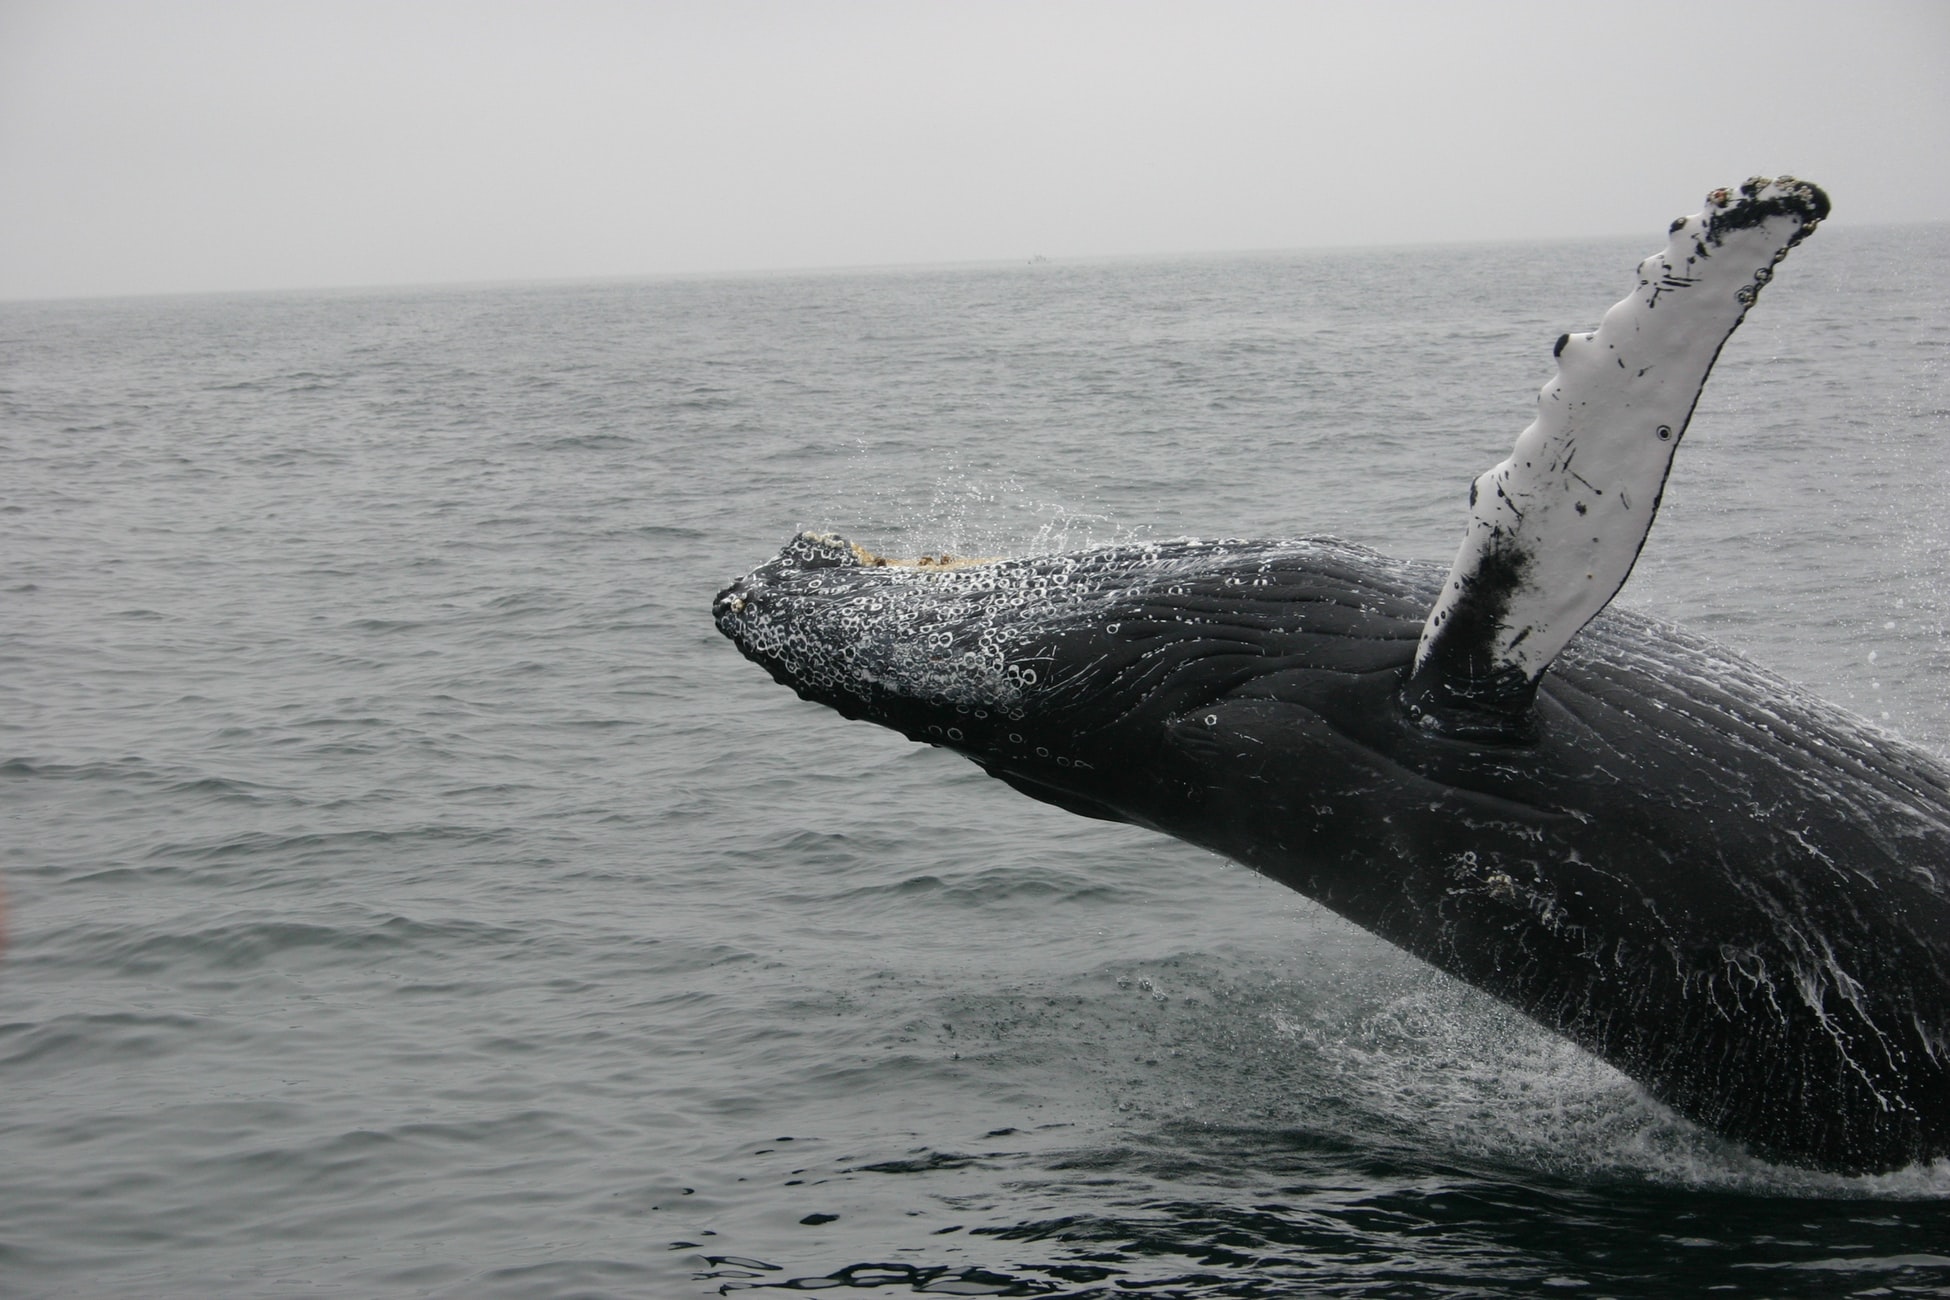 When it comes to whaling, humpbacks are vulnerable. The fact that they are slow-moving and tend to enjoy coastal waters makes them a prime target.